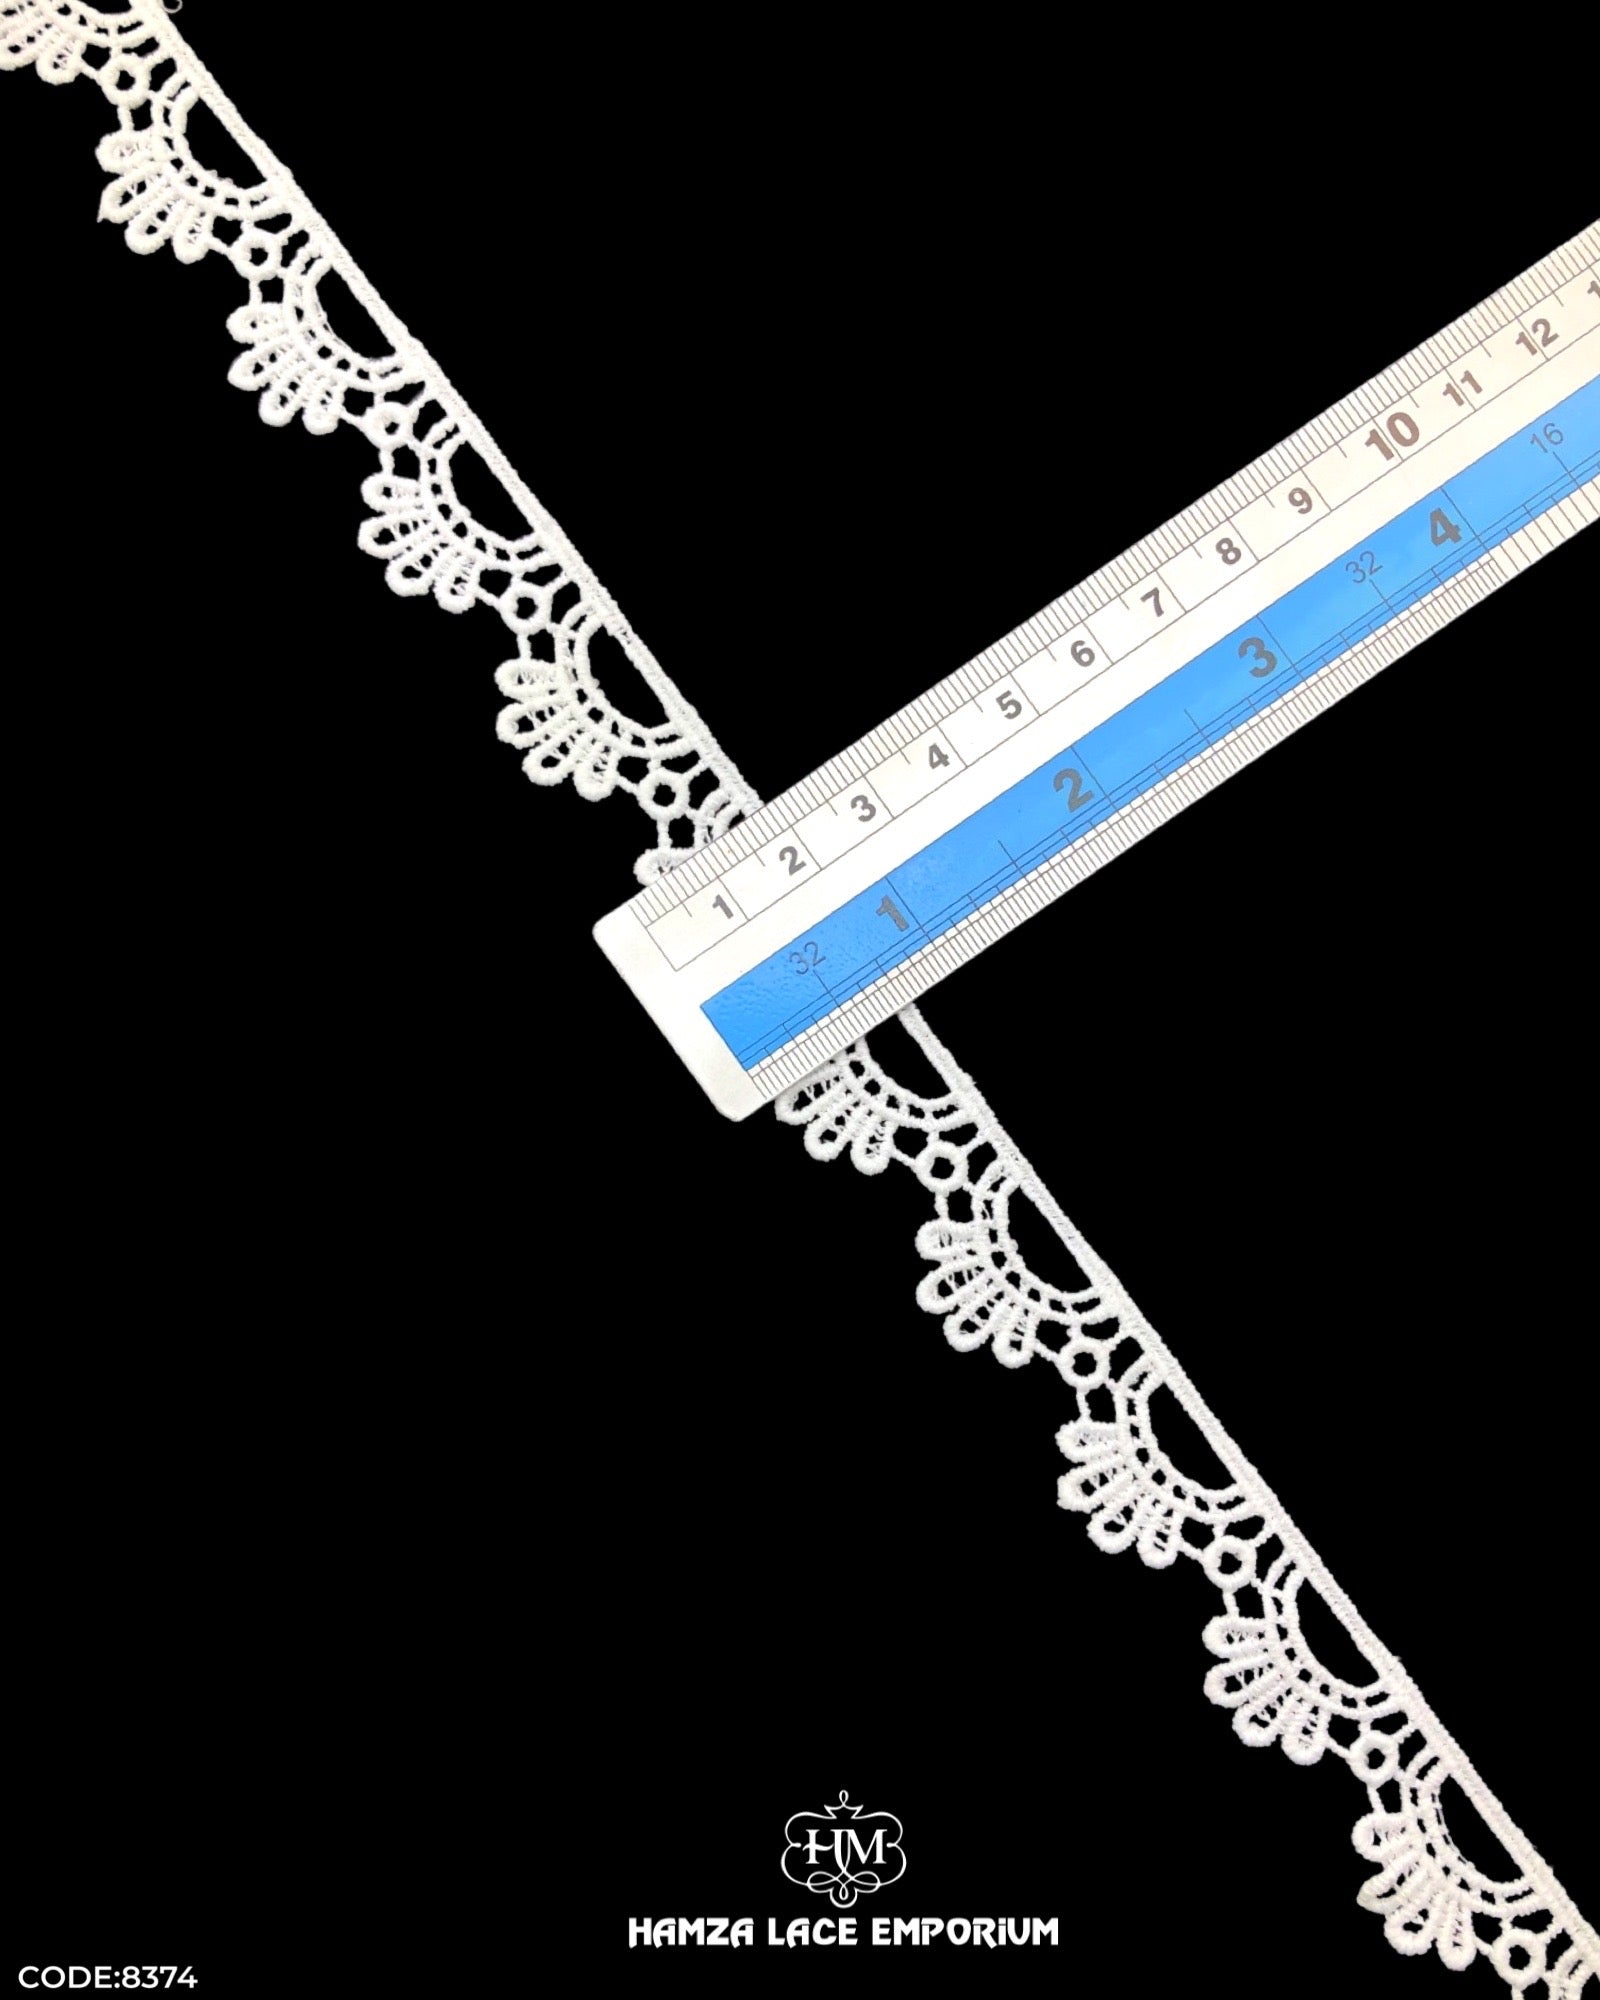 Size of the 'Edging Scallop Lace 8374' is shown as '1' inch with the help of a ruler